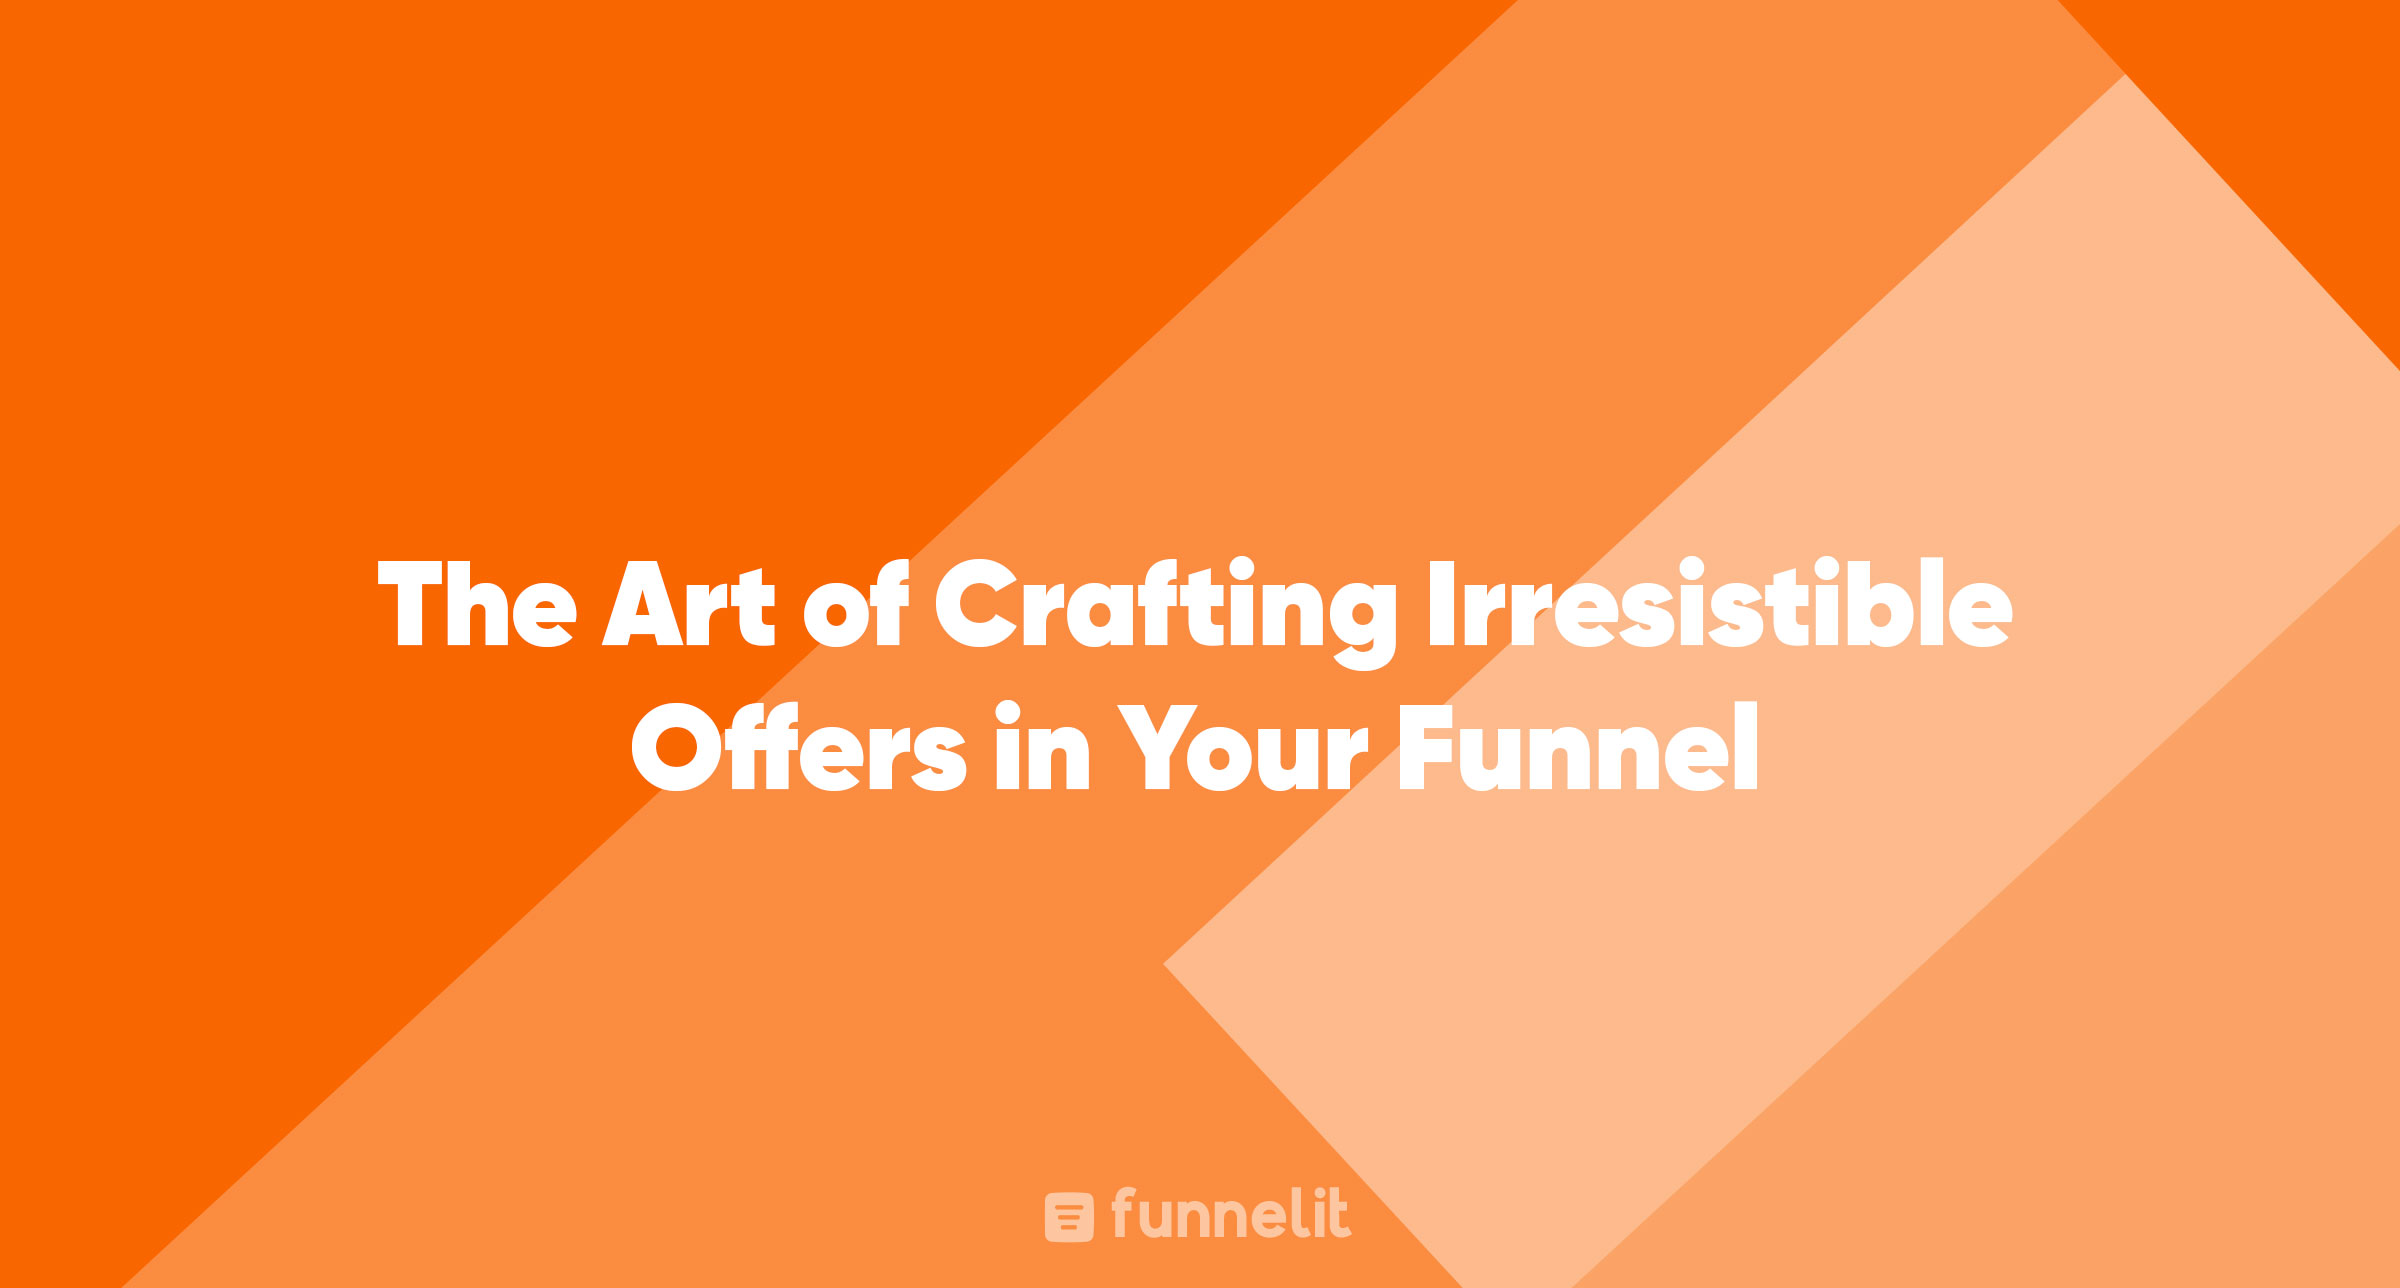 Article | The Art of Crafting Irresistible Offers in Your Funnel